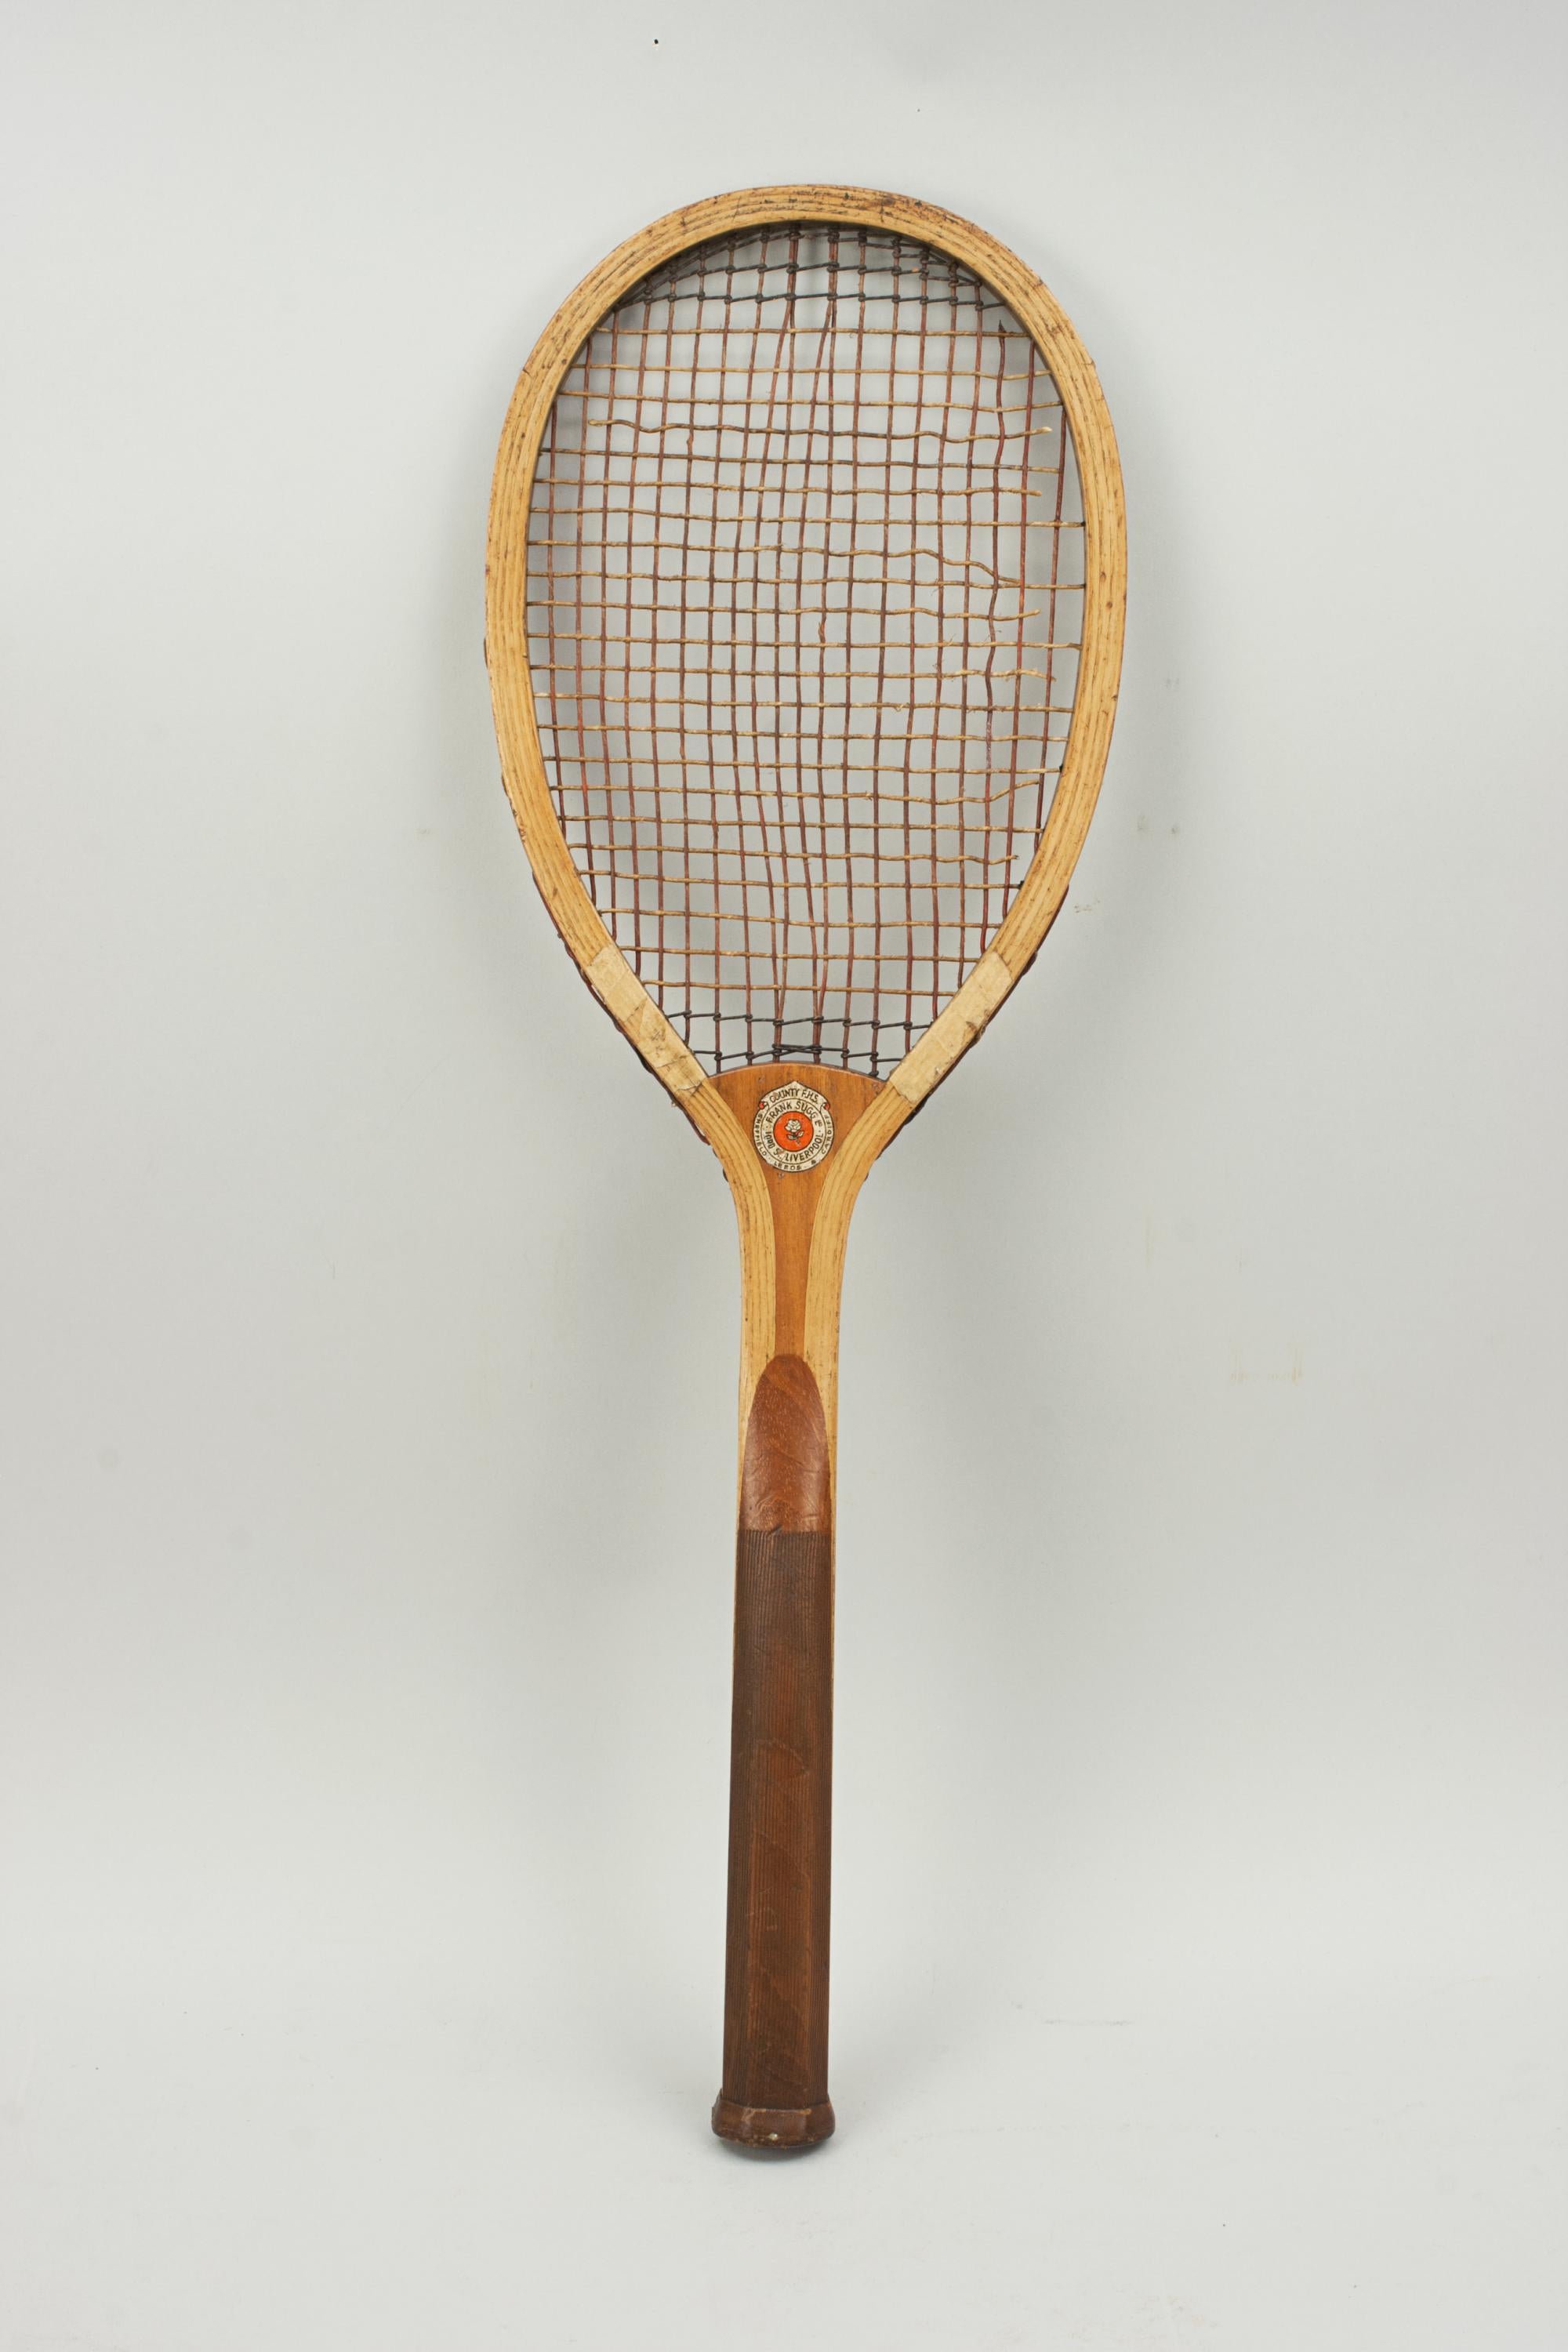 Antique Lawn Tennis Racket, Frank Sugg, Liverpool For Sale 5